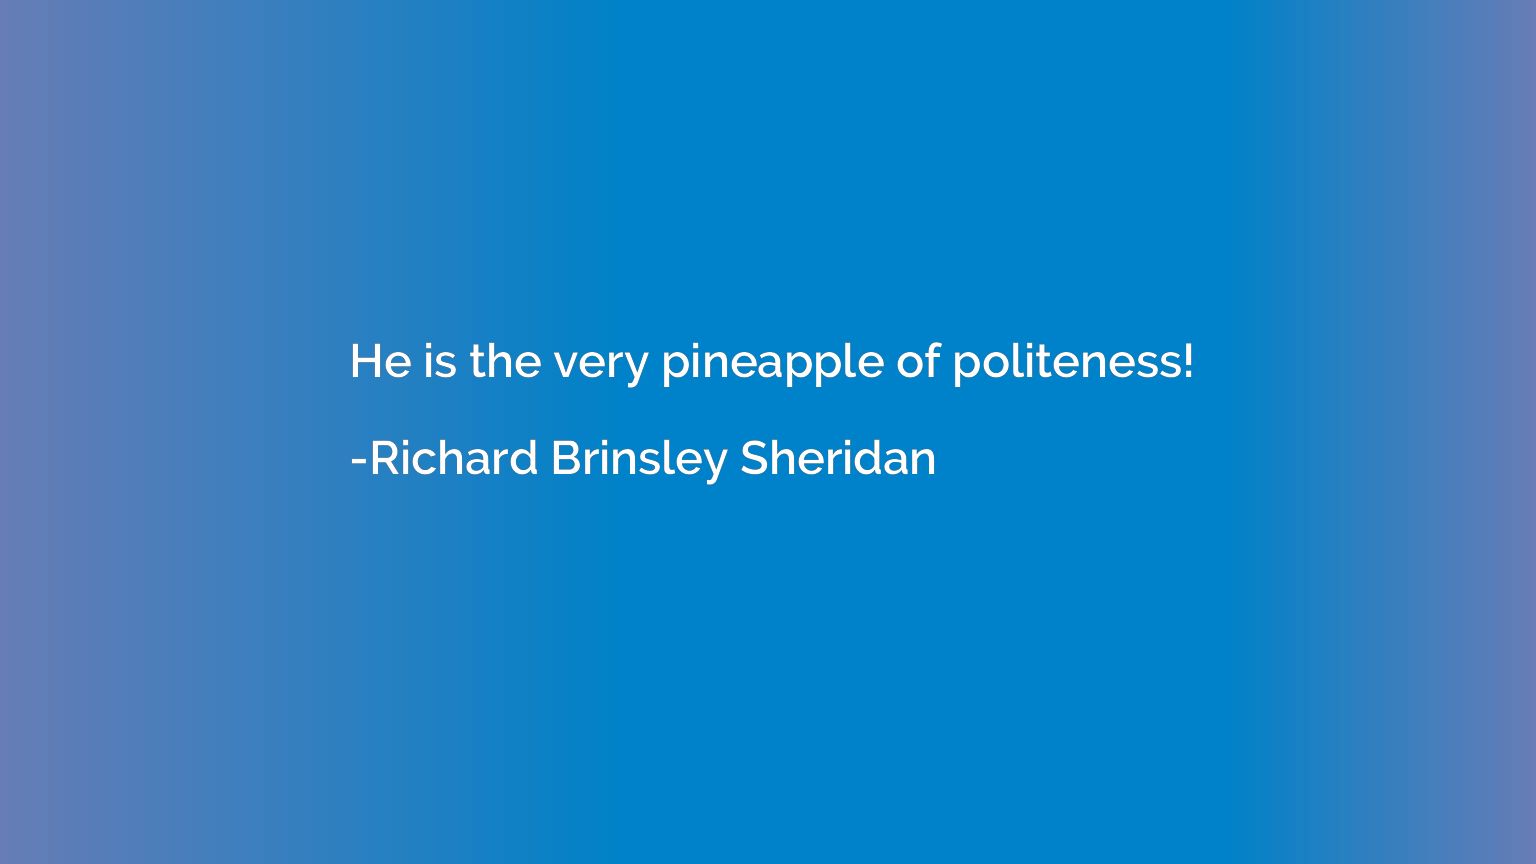 He is the very pineapple of politeness!